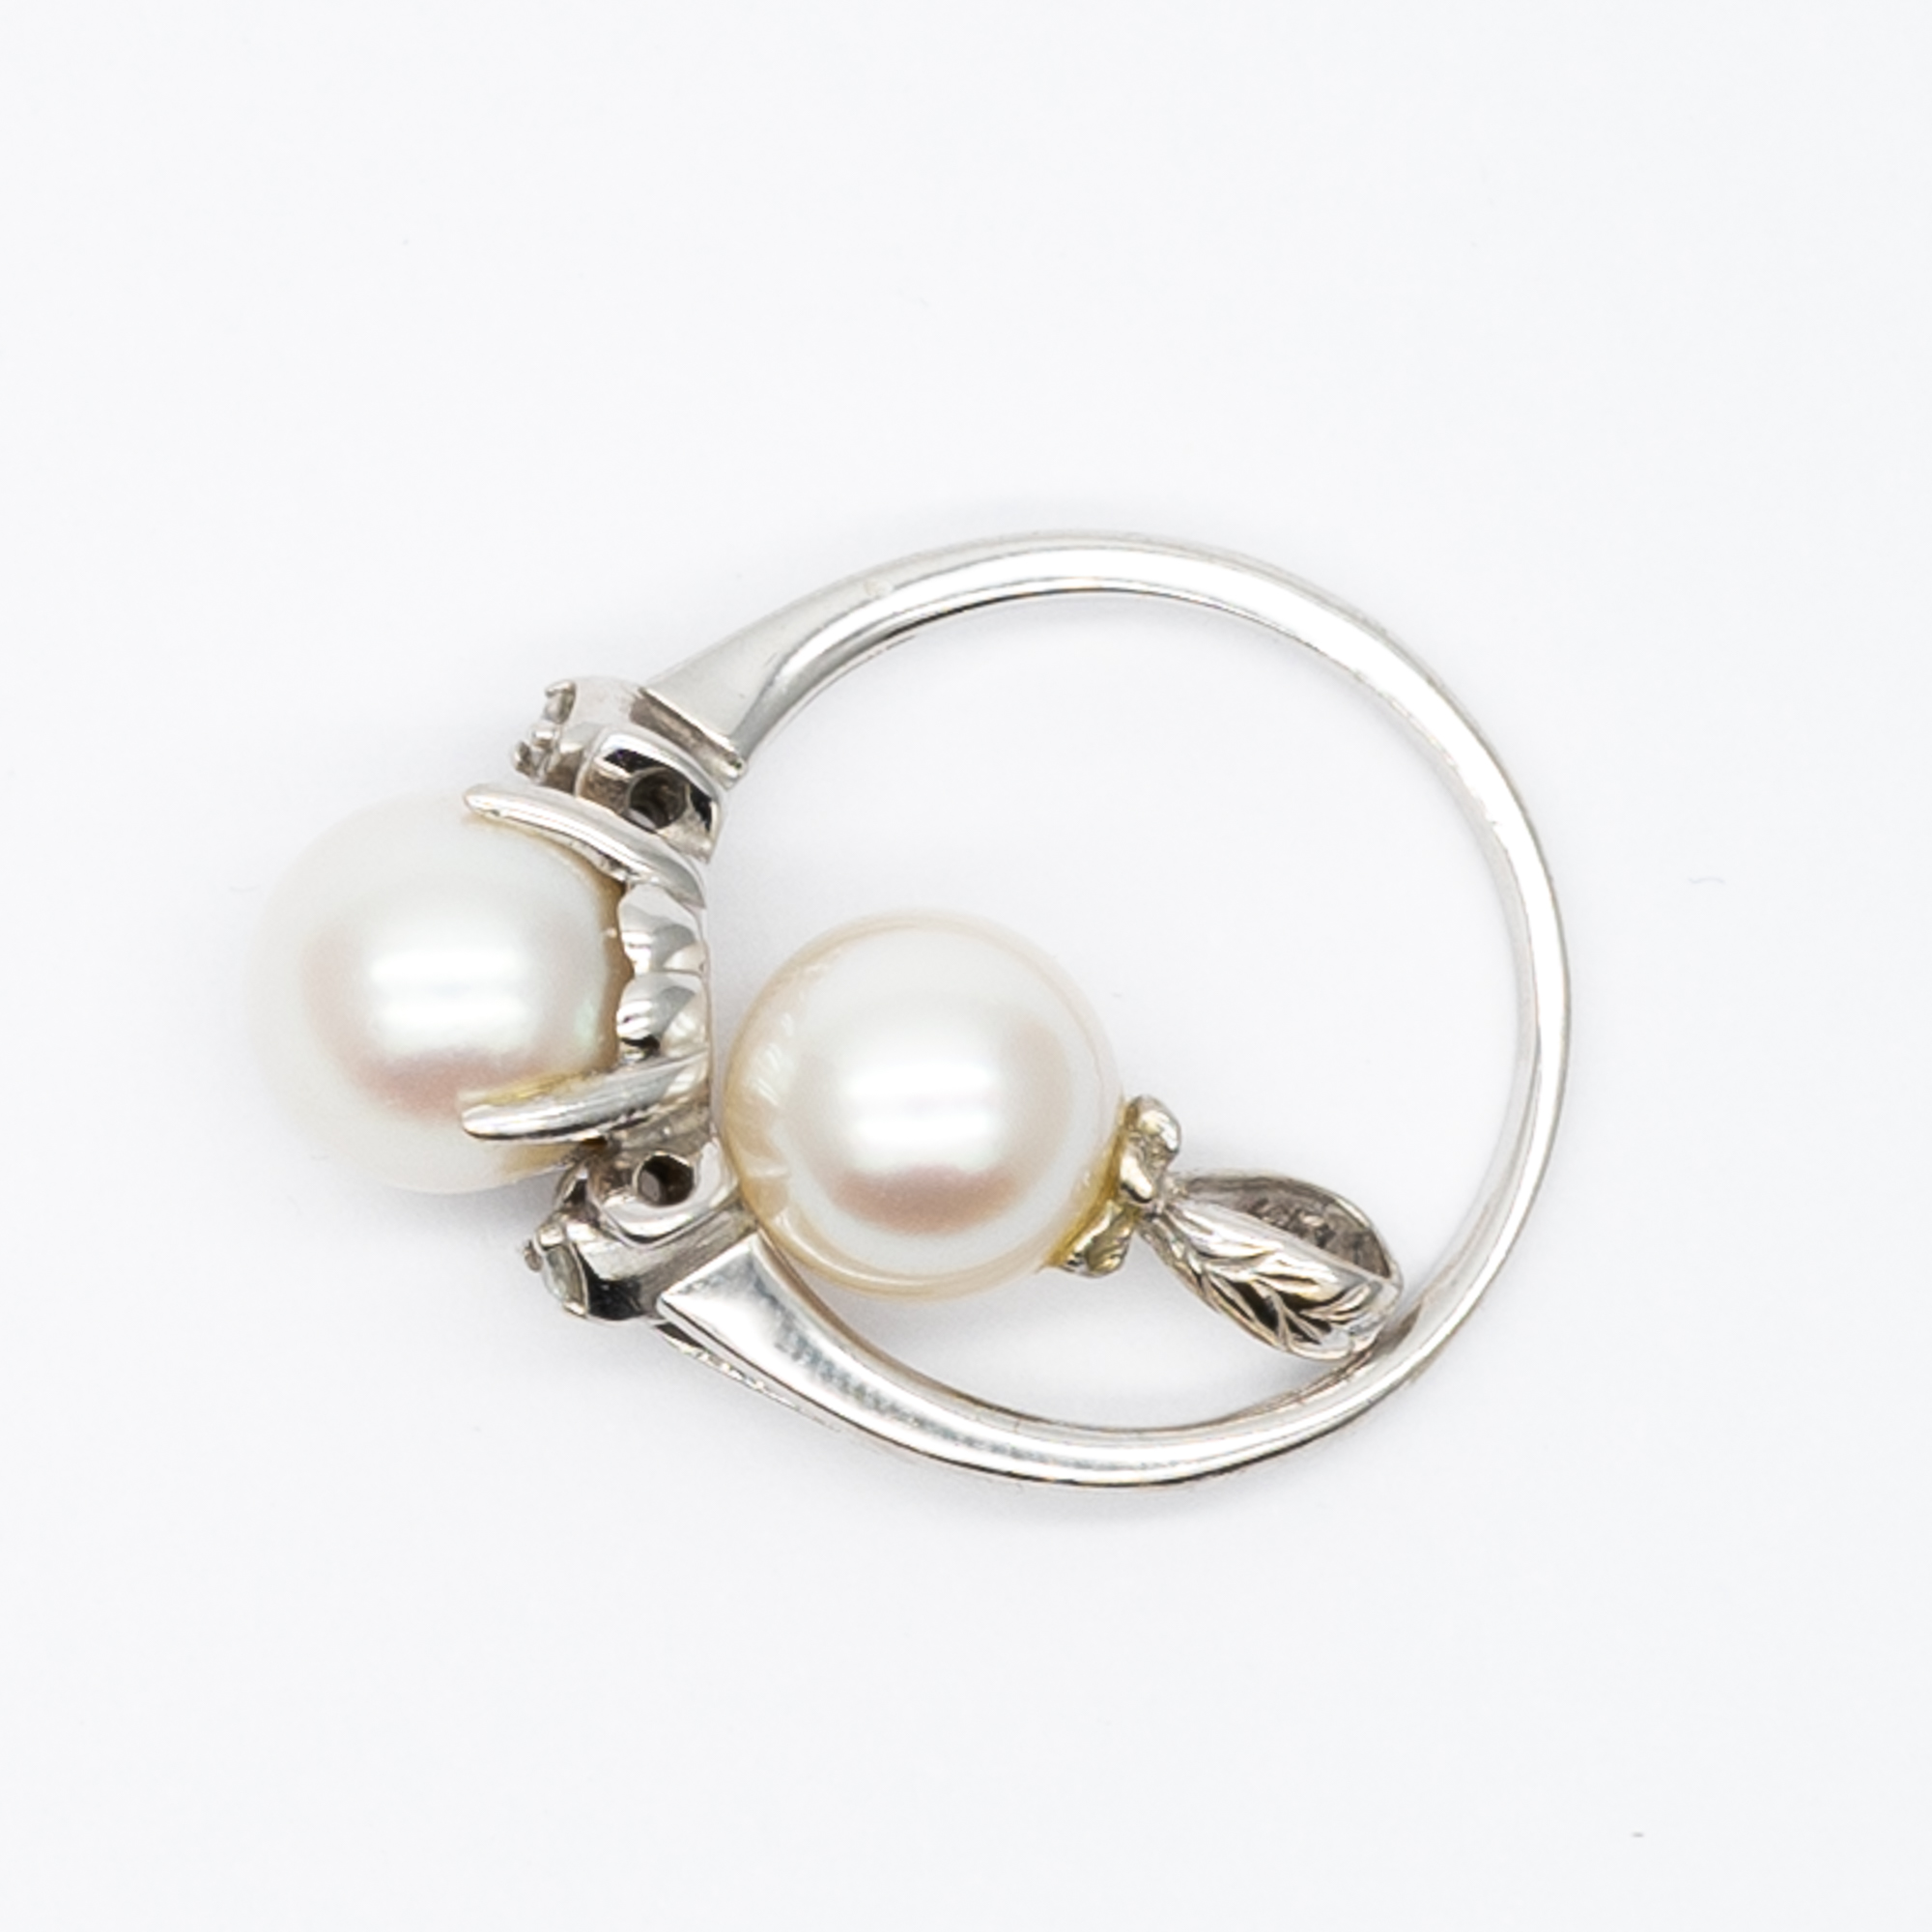 A 14ct white gold pearl and diamond ring with matching pendant - Image 5 of 7